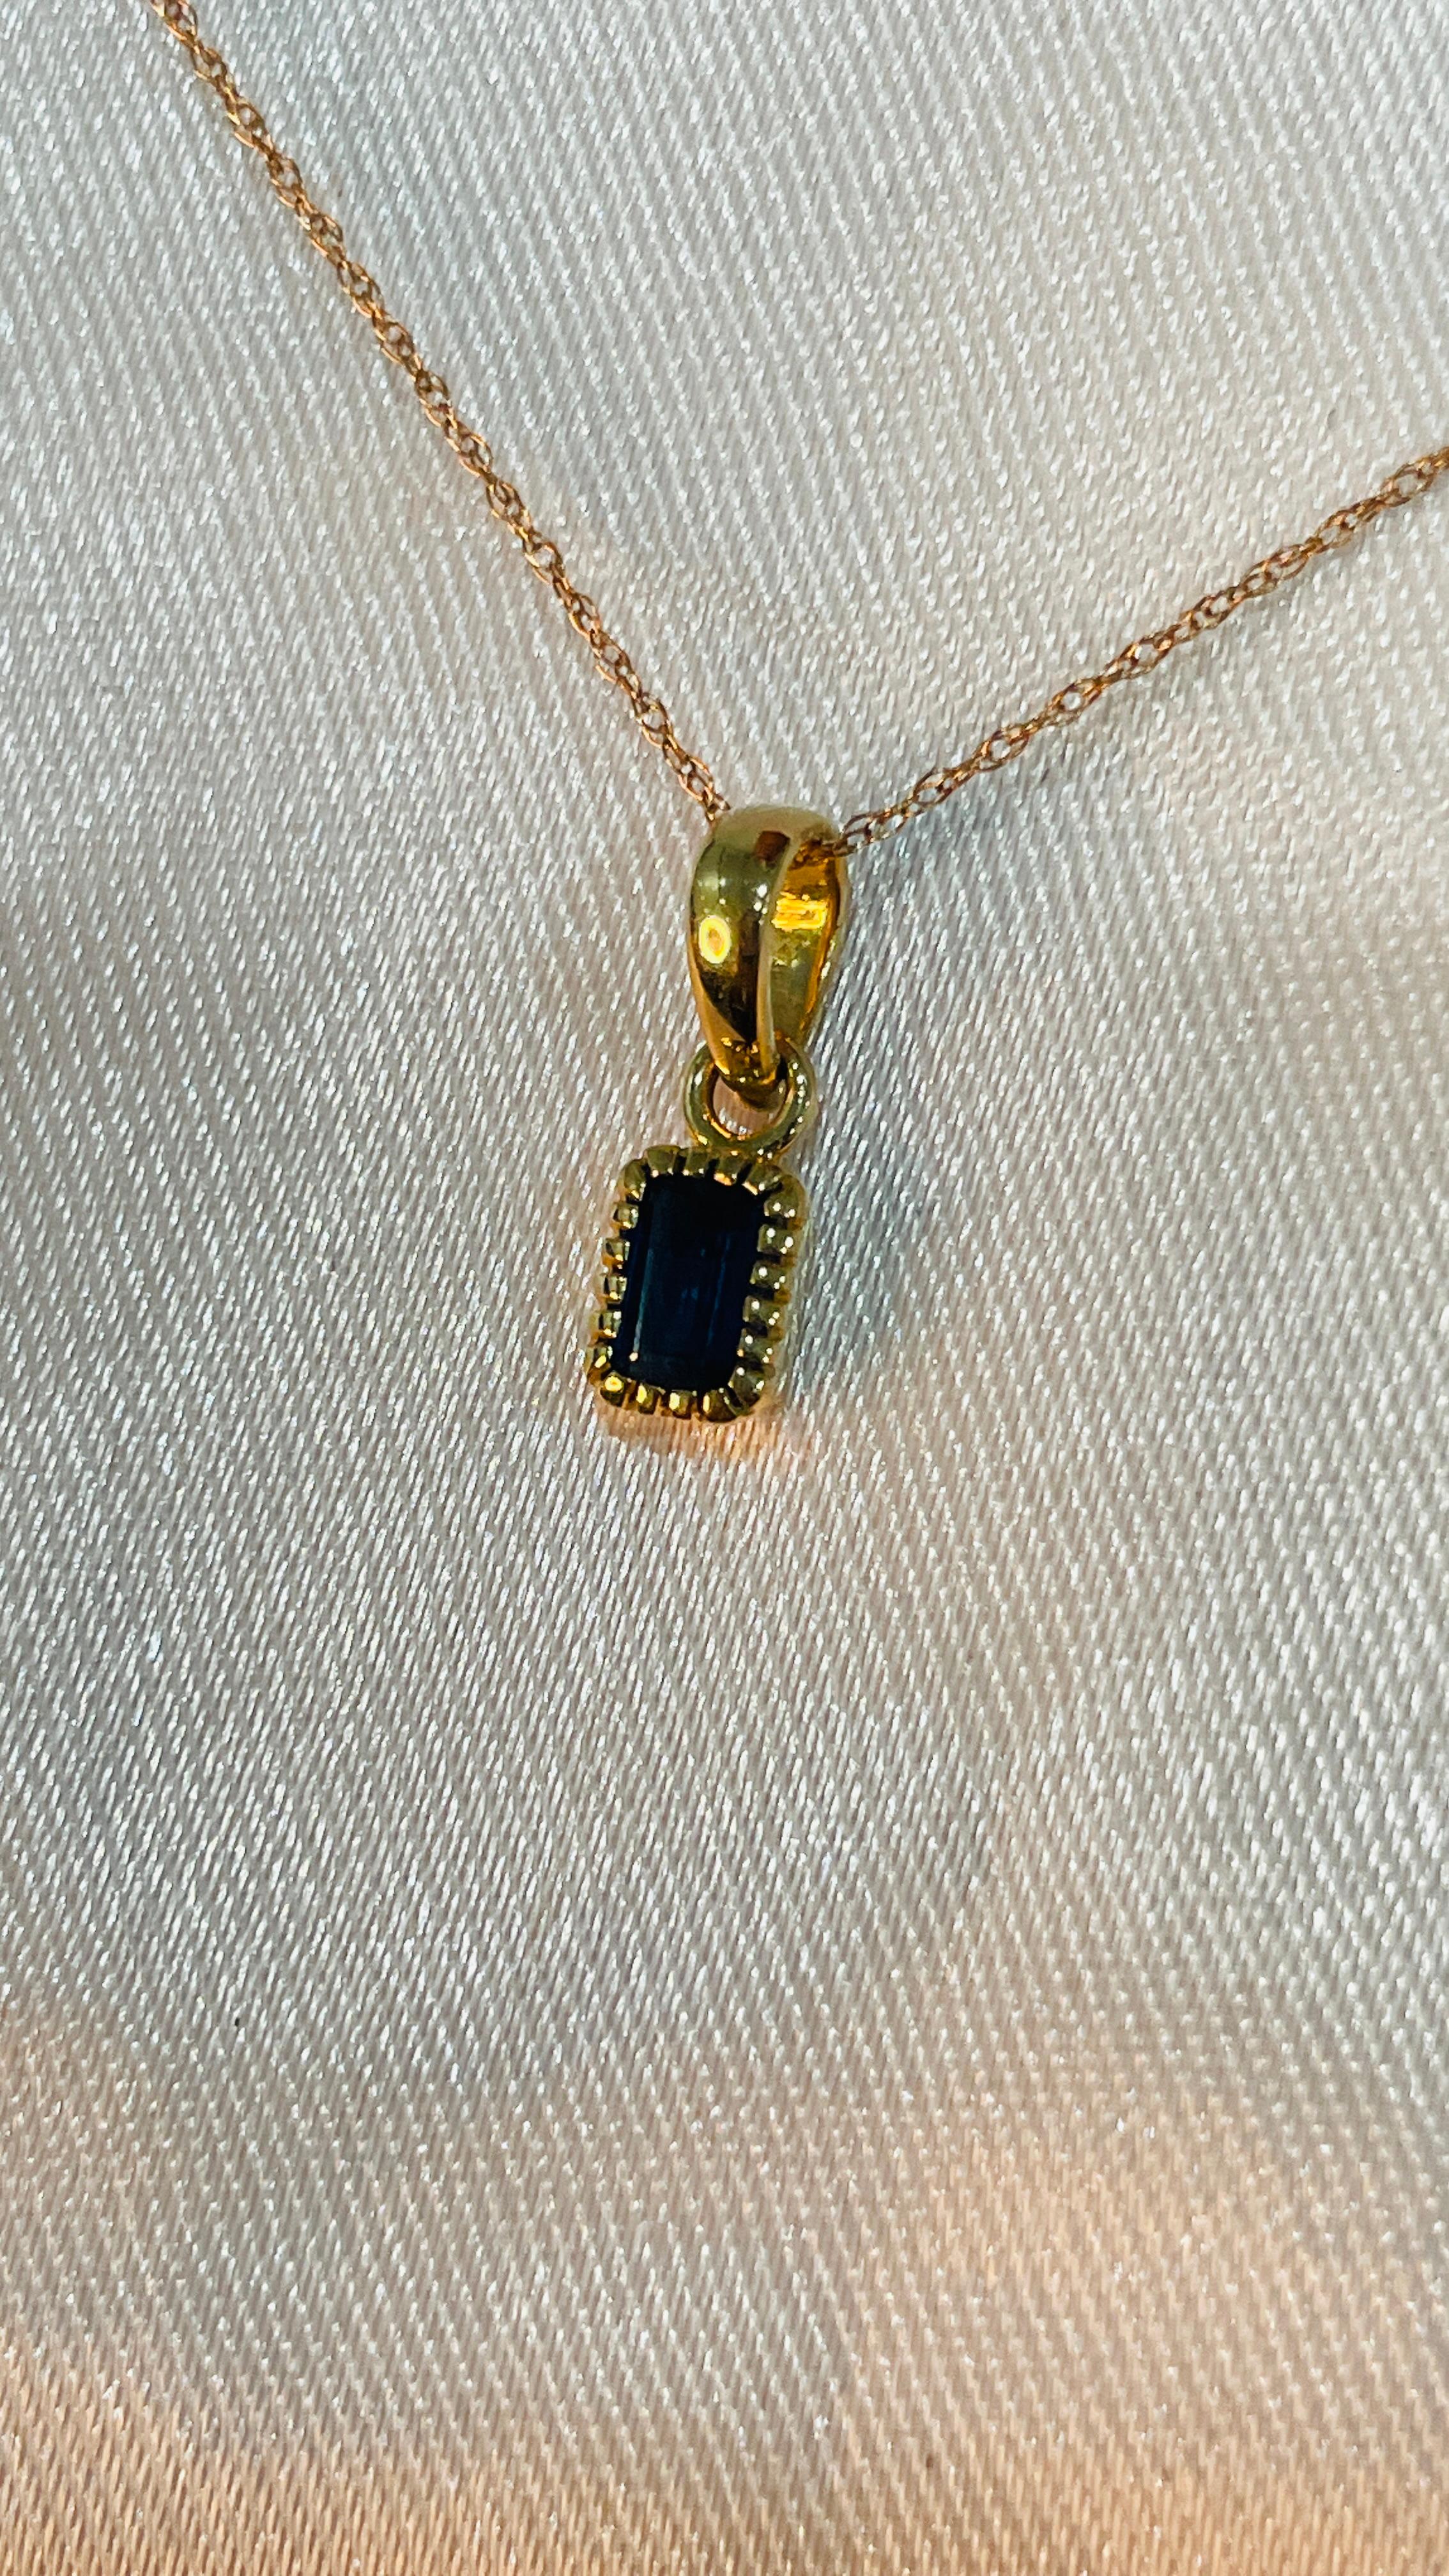 Natural Blue Sapphire pendant in 14K Gold. It has a octagon cut sapphire that completes your look with a decent touch. Pendants are used to wear or gifted to represent love and promises. It's an attractive jewelry piece that goes with every basic